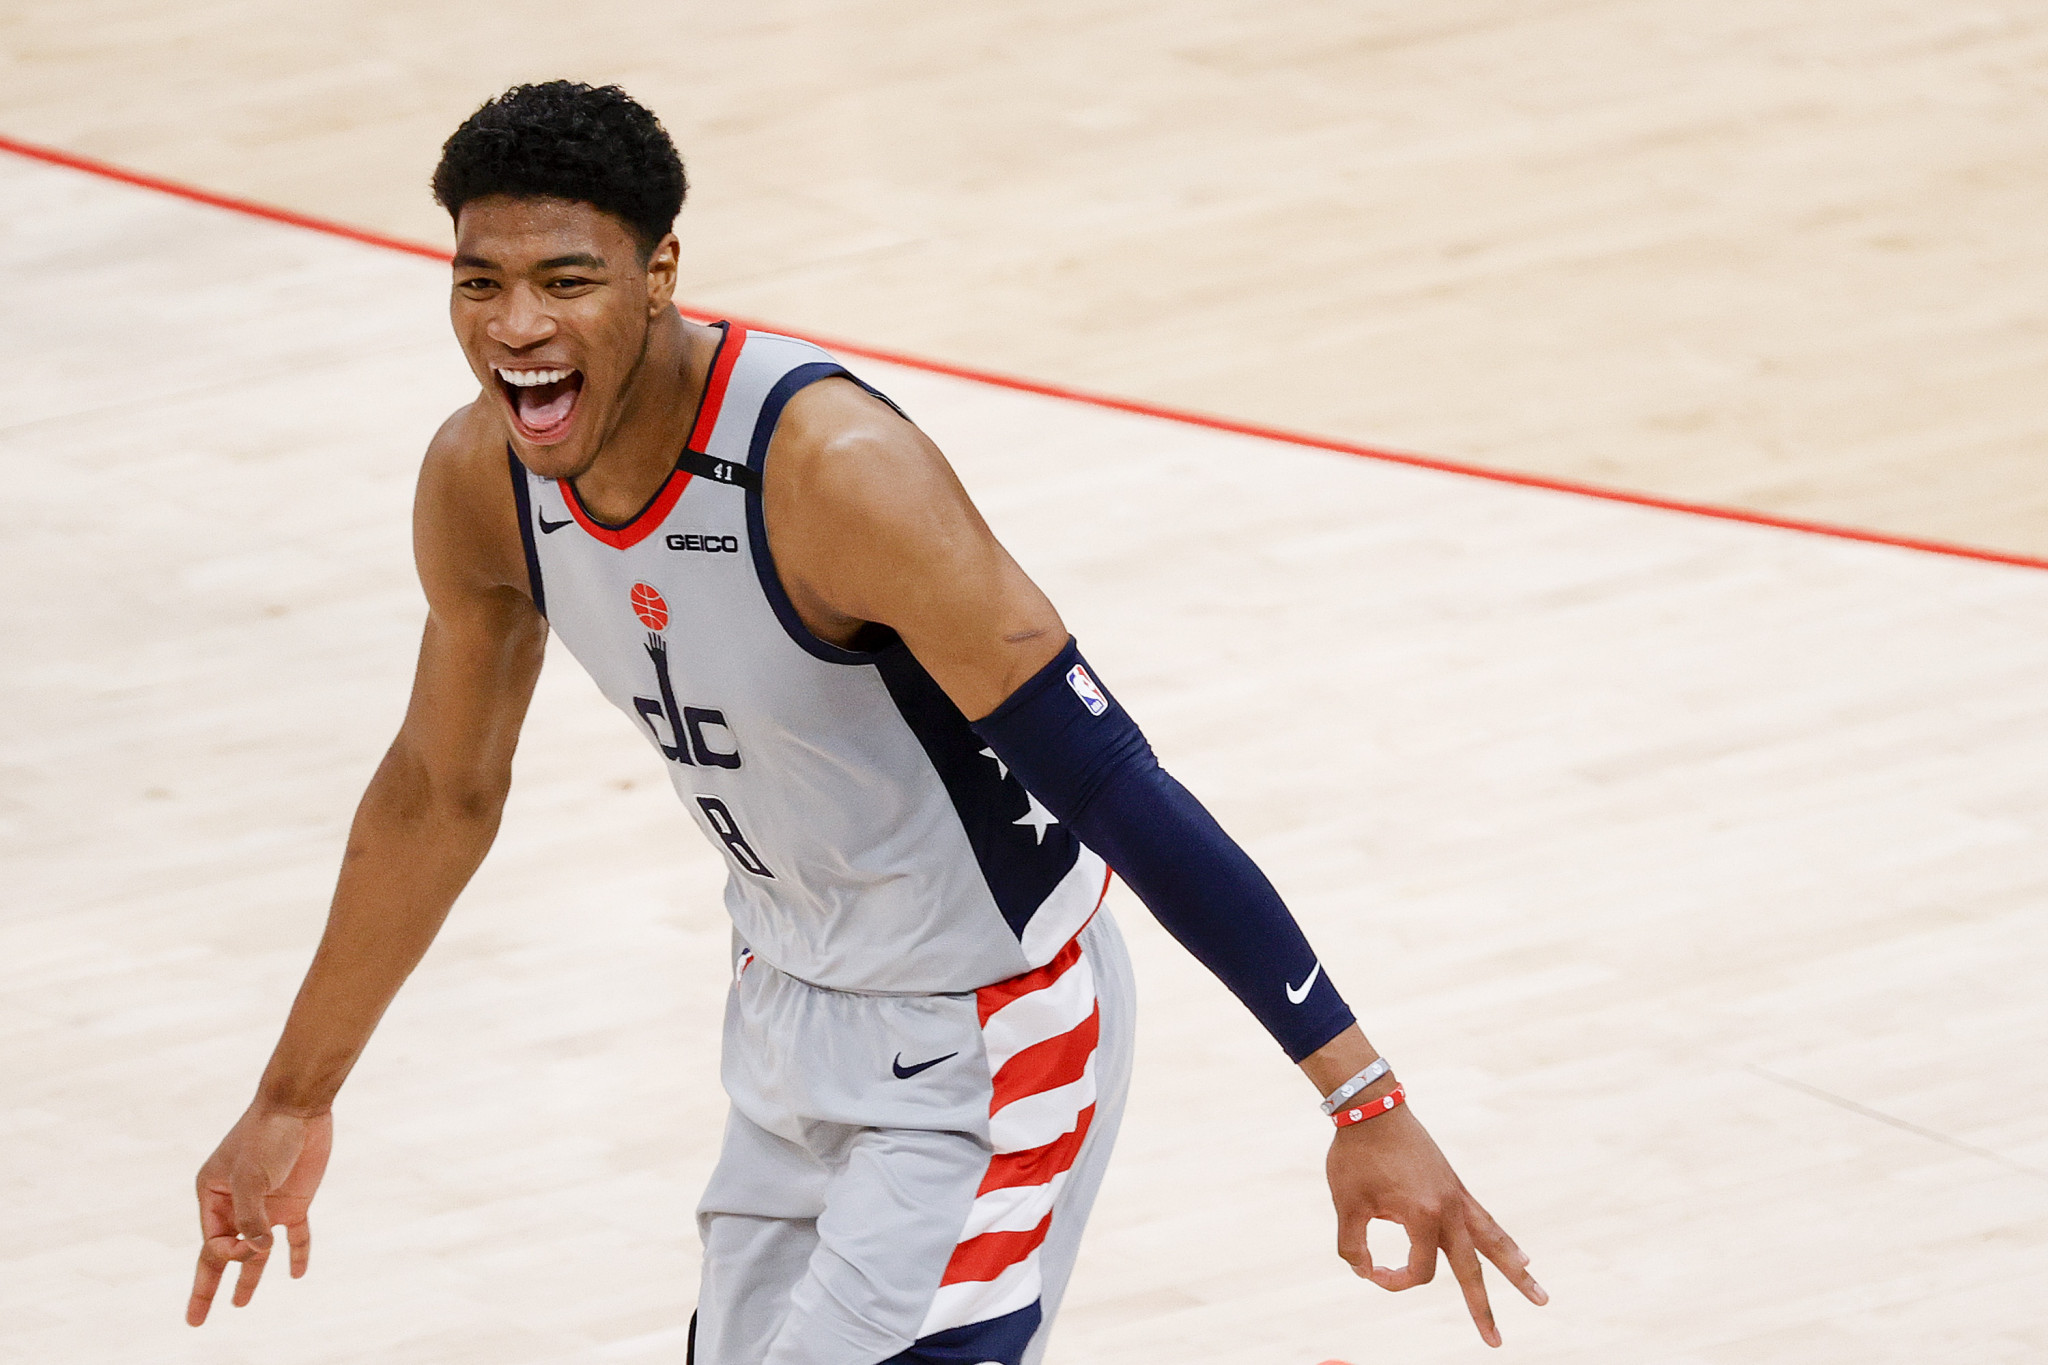 Rui Hachimura has been named as one of Japan's Opening Ceremony flagbearers ©Getty Images